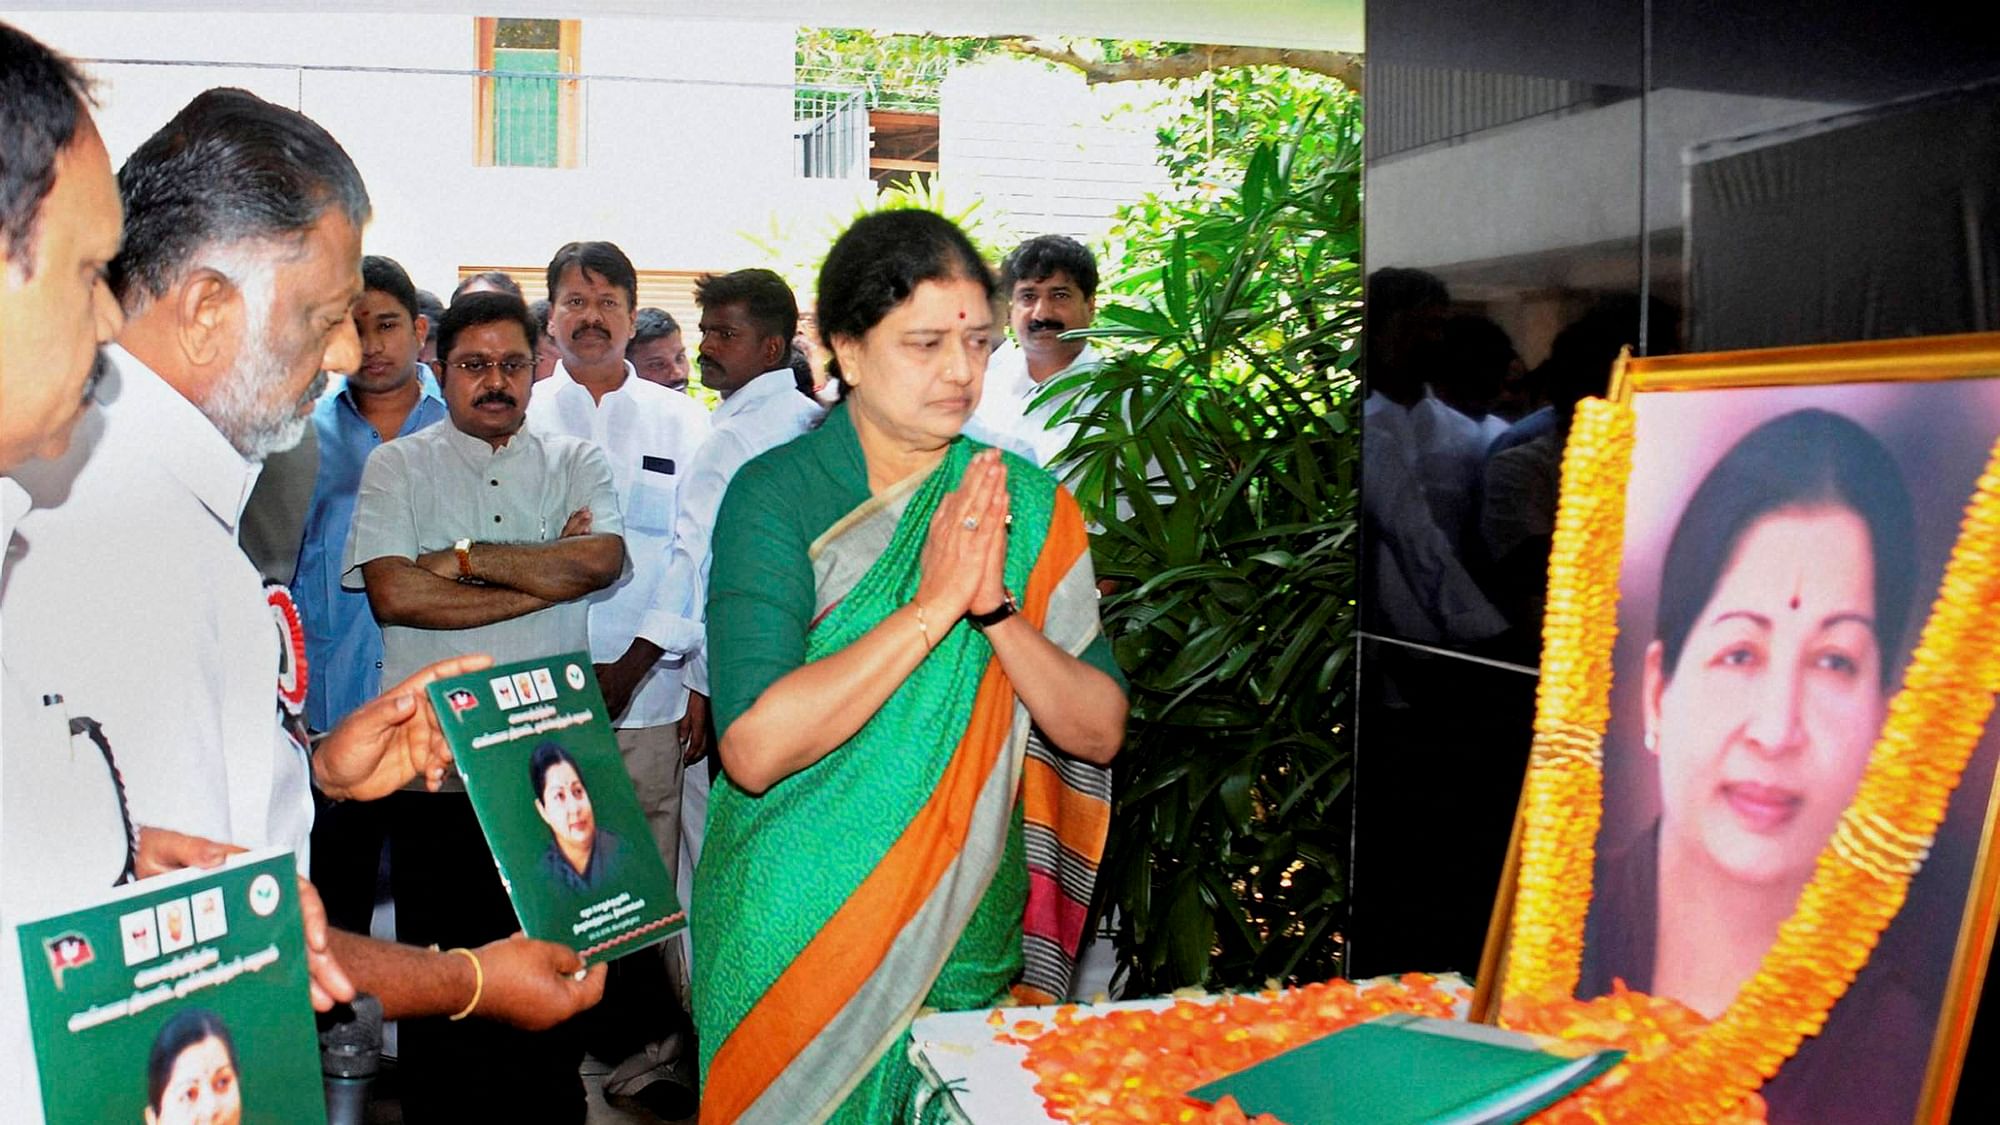 Sasikala pays tribute to J Jayalalithaa after she was appointed as AIADMK General Secretary on 29 December. (Photo: PTI)